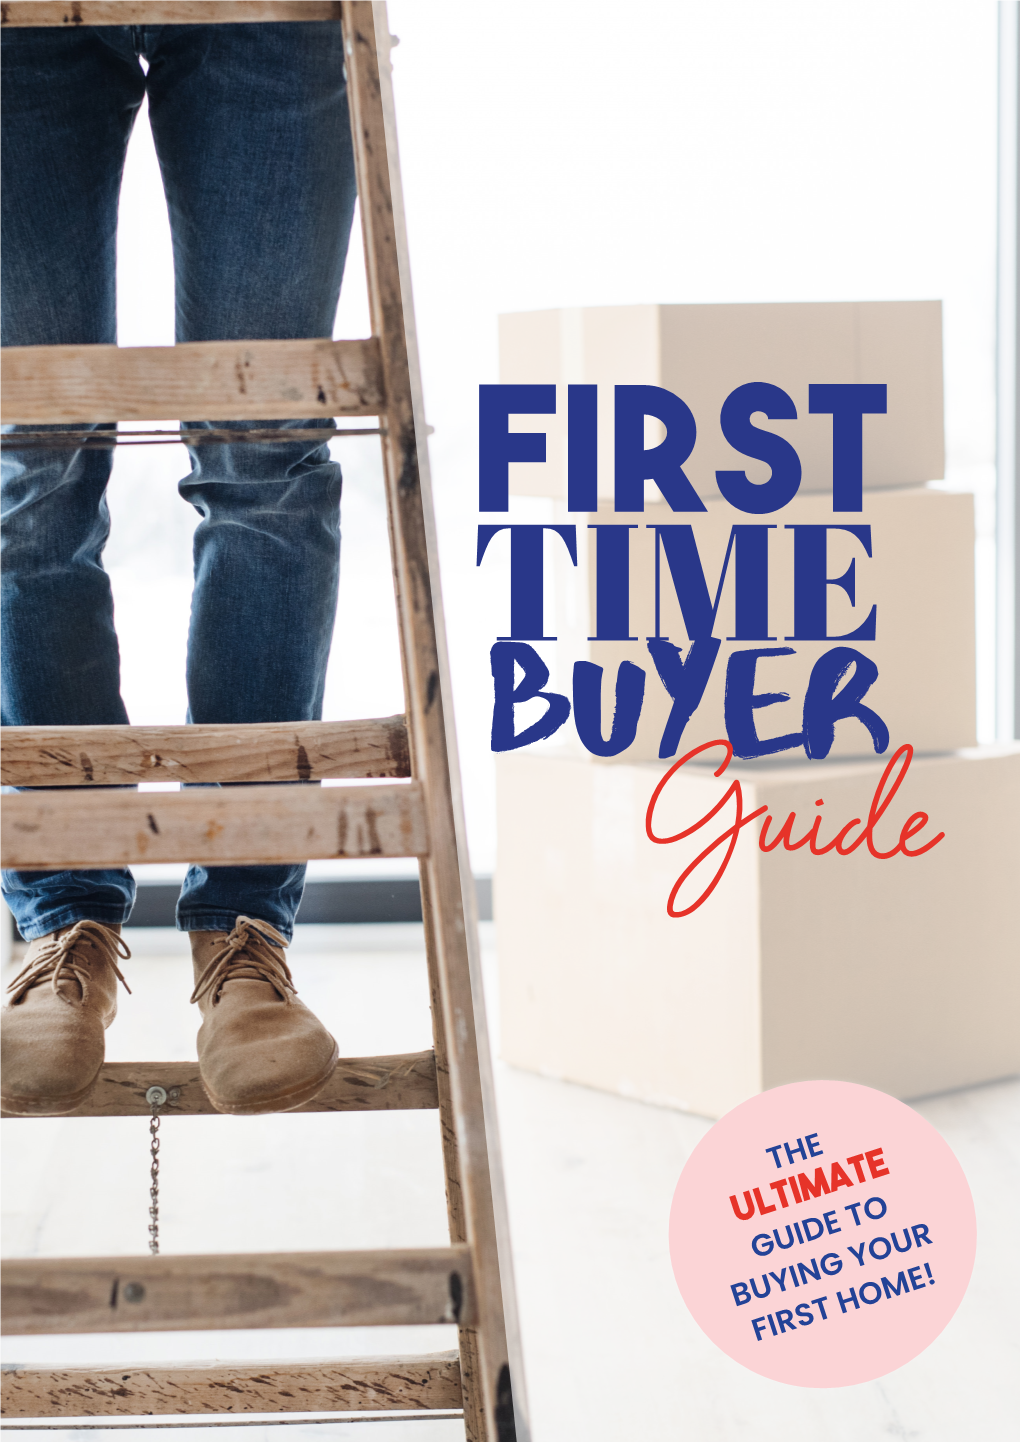 FIRST TIME Buyer Guide